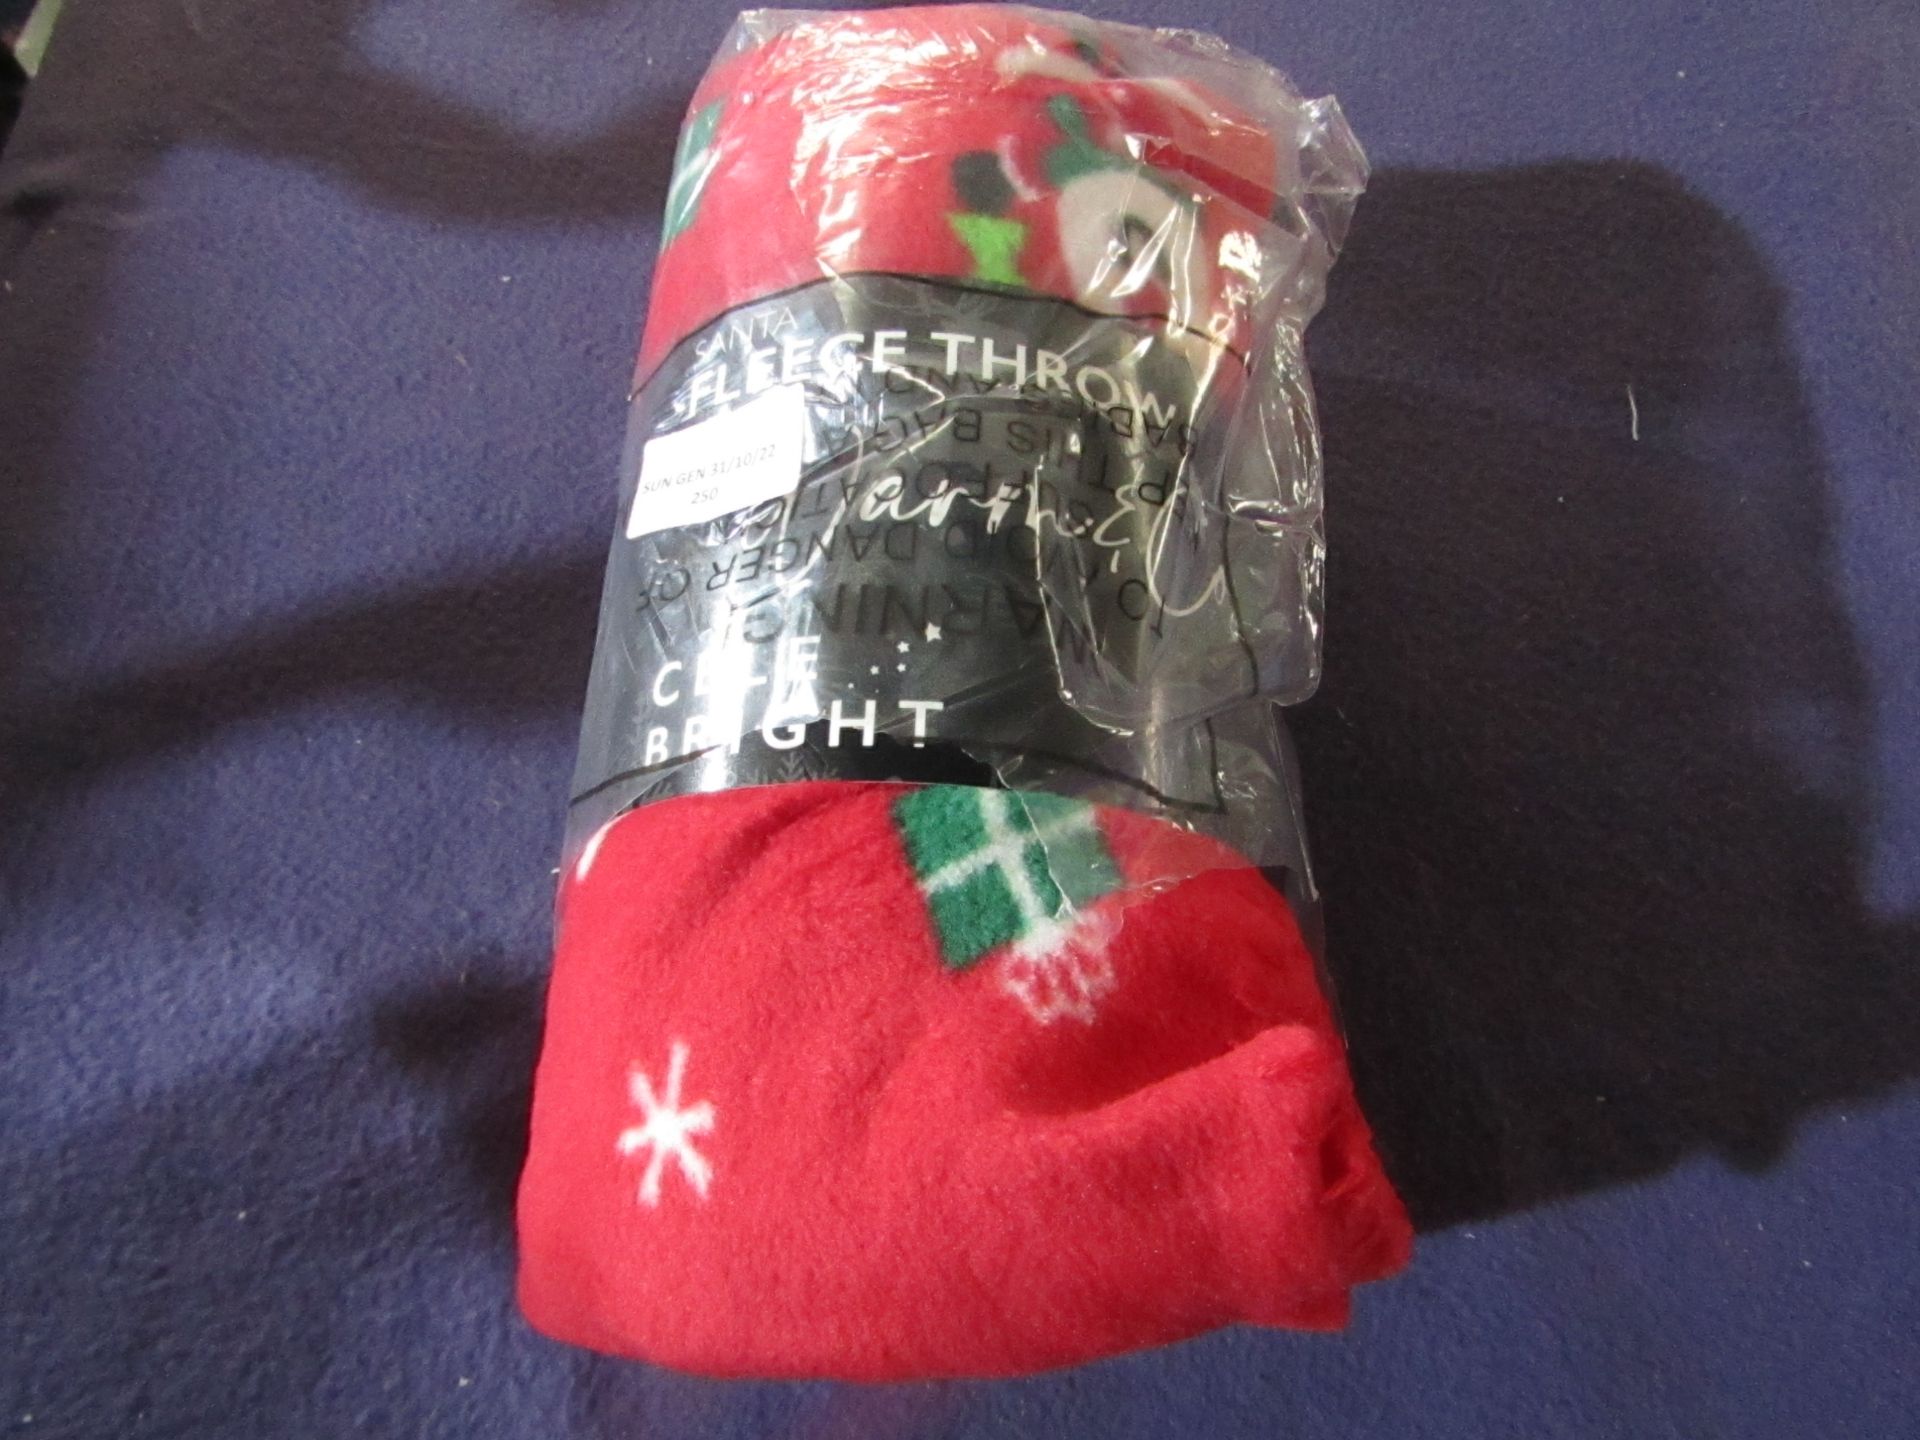 Celebright - Santa Christmas Fleece Throw - Size Uknown - Good Condition & Packaged.